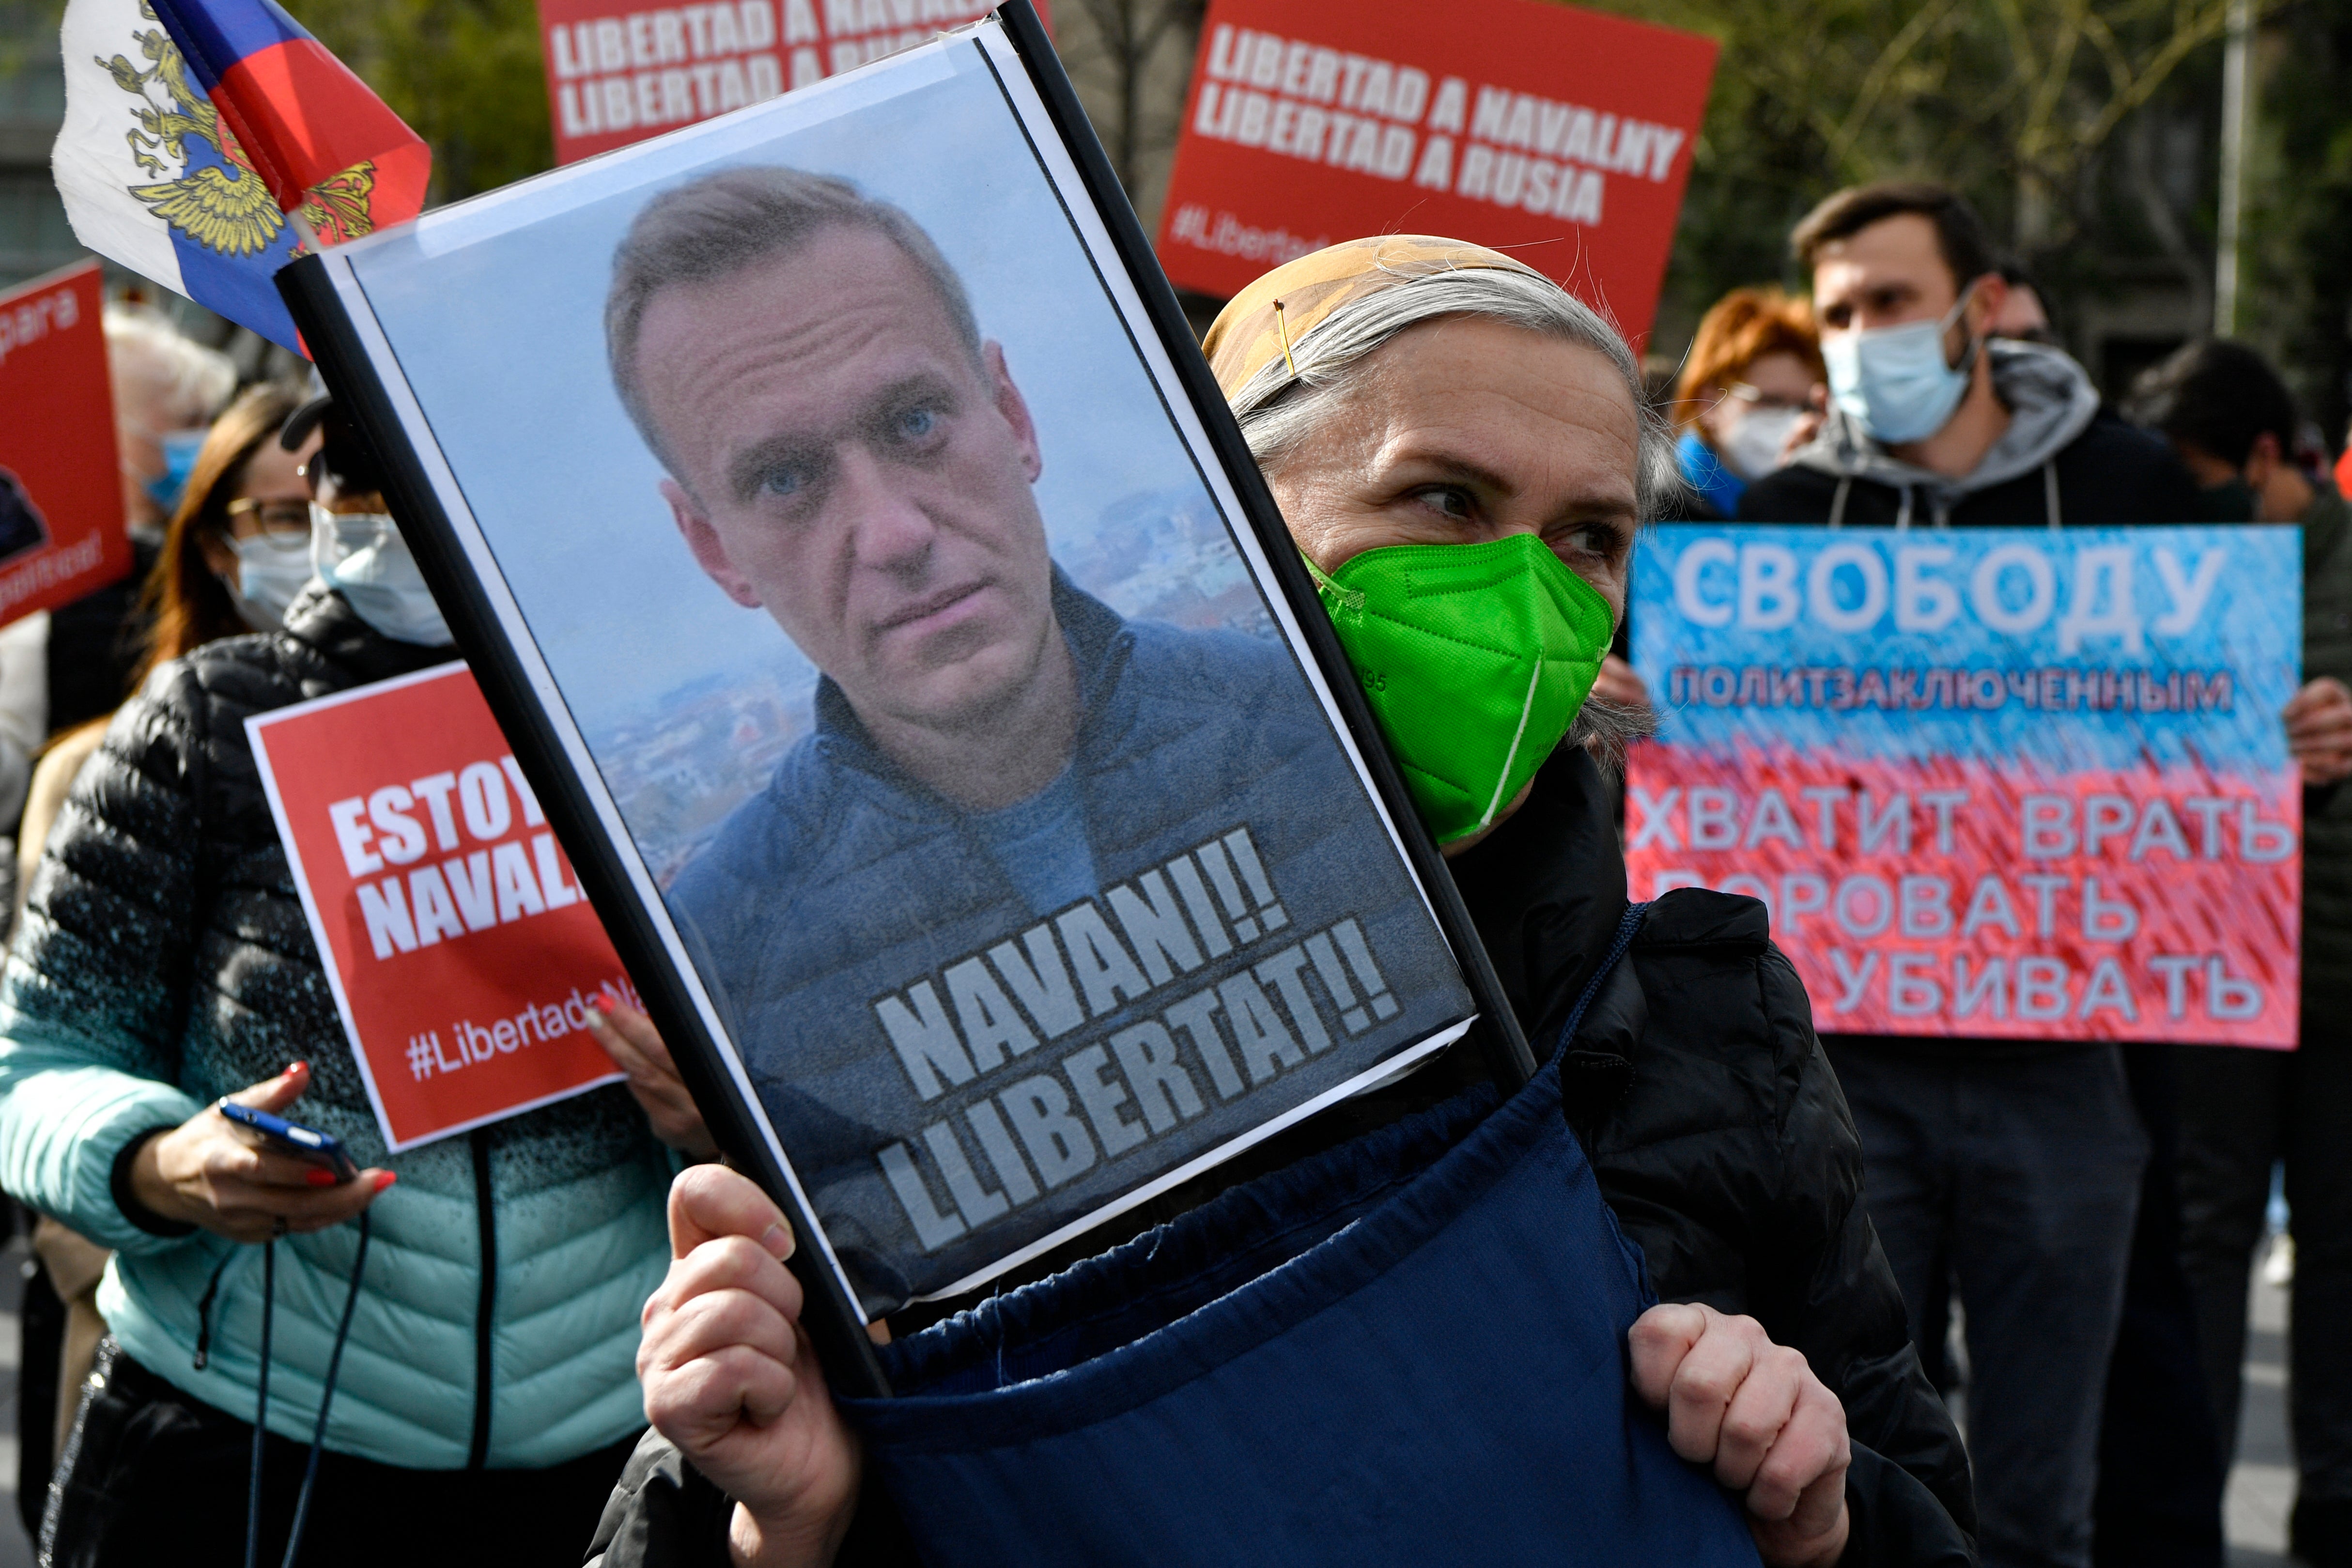 A woman holds a picture of detained Russian opposition leader Alexei Navalny reading "Free Navalny!" during a demonstration in Barcelona